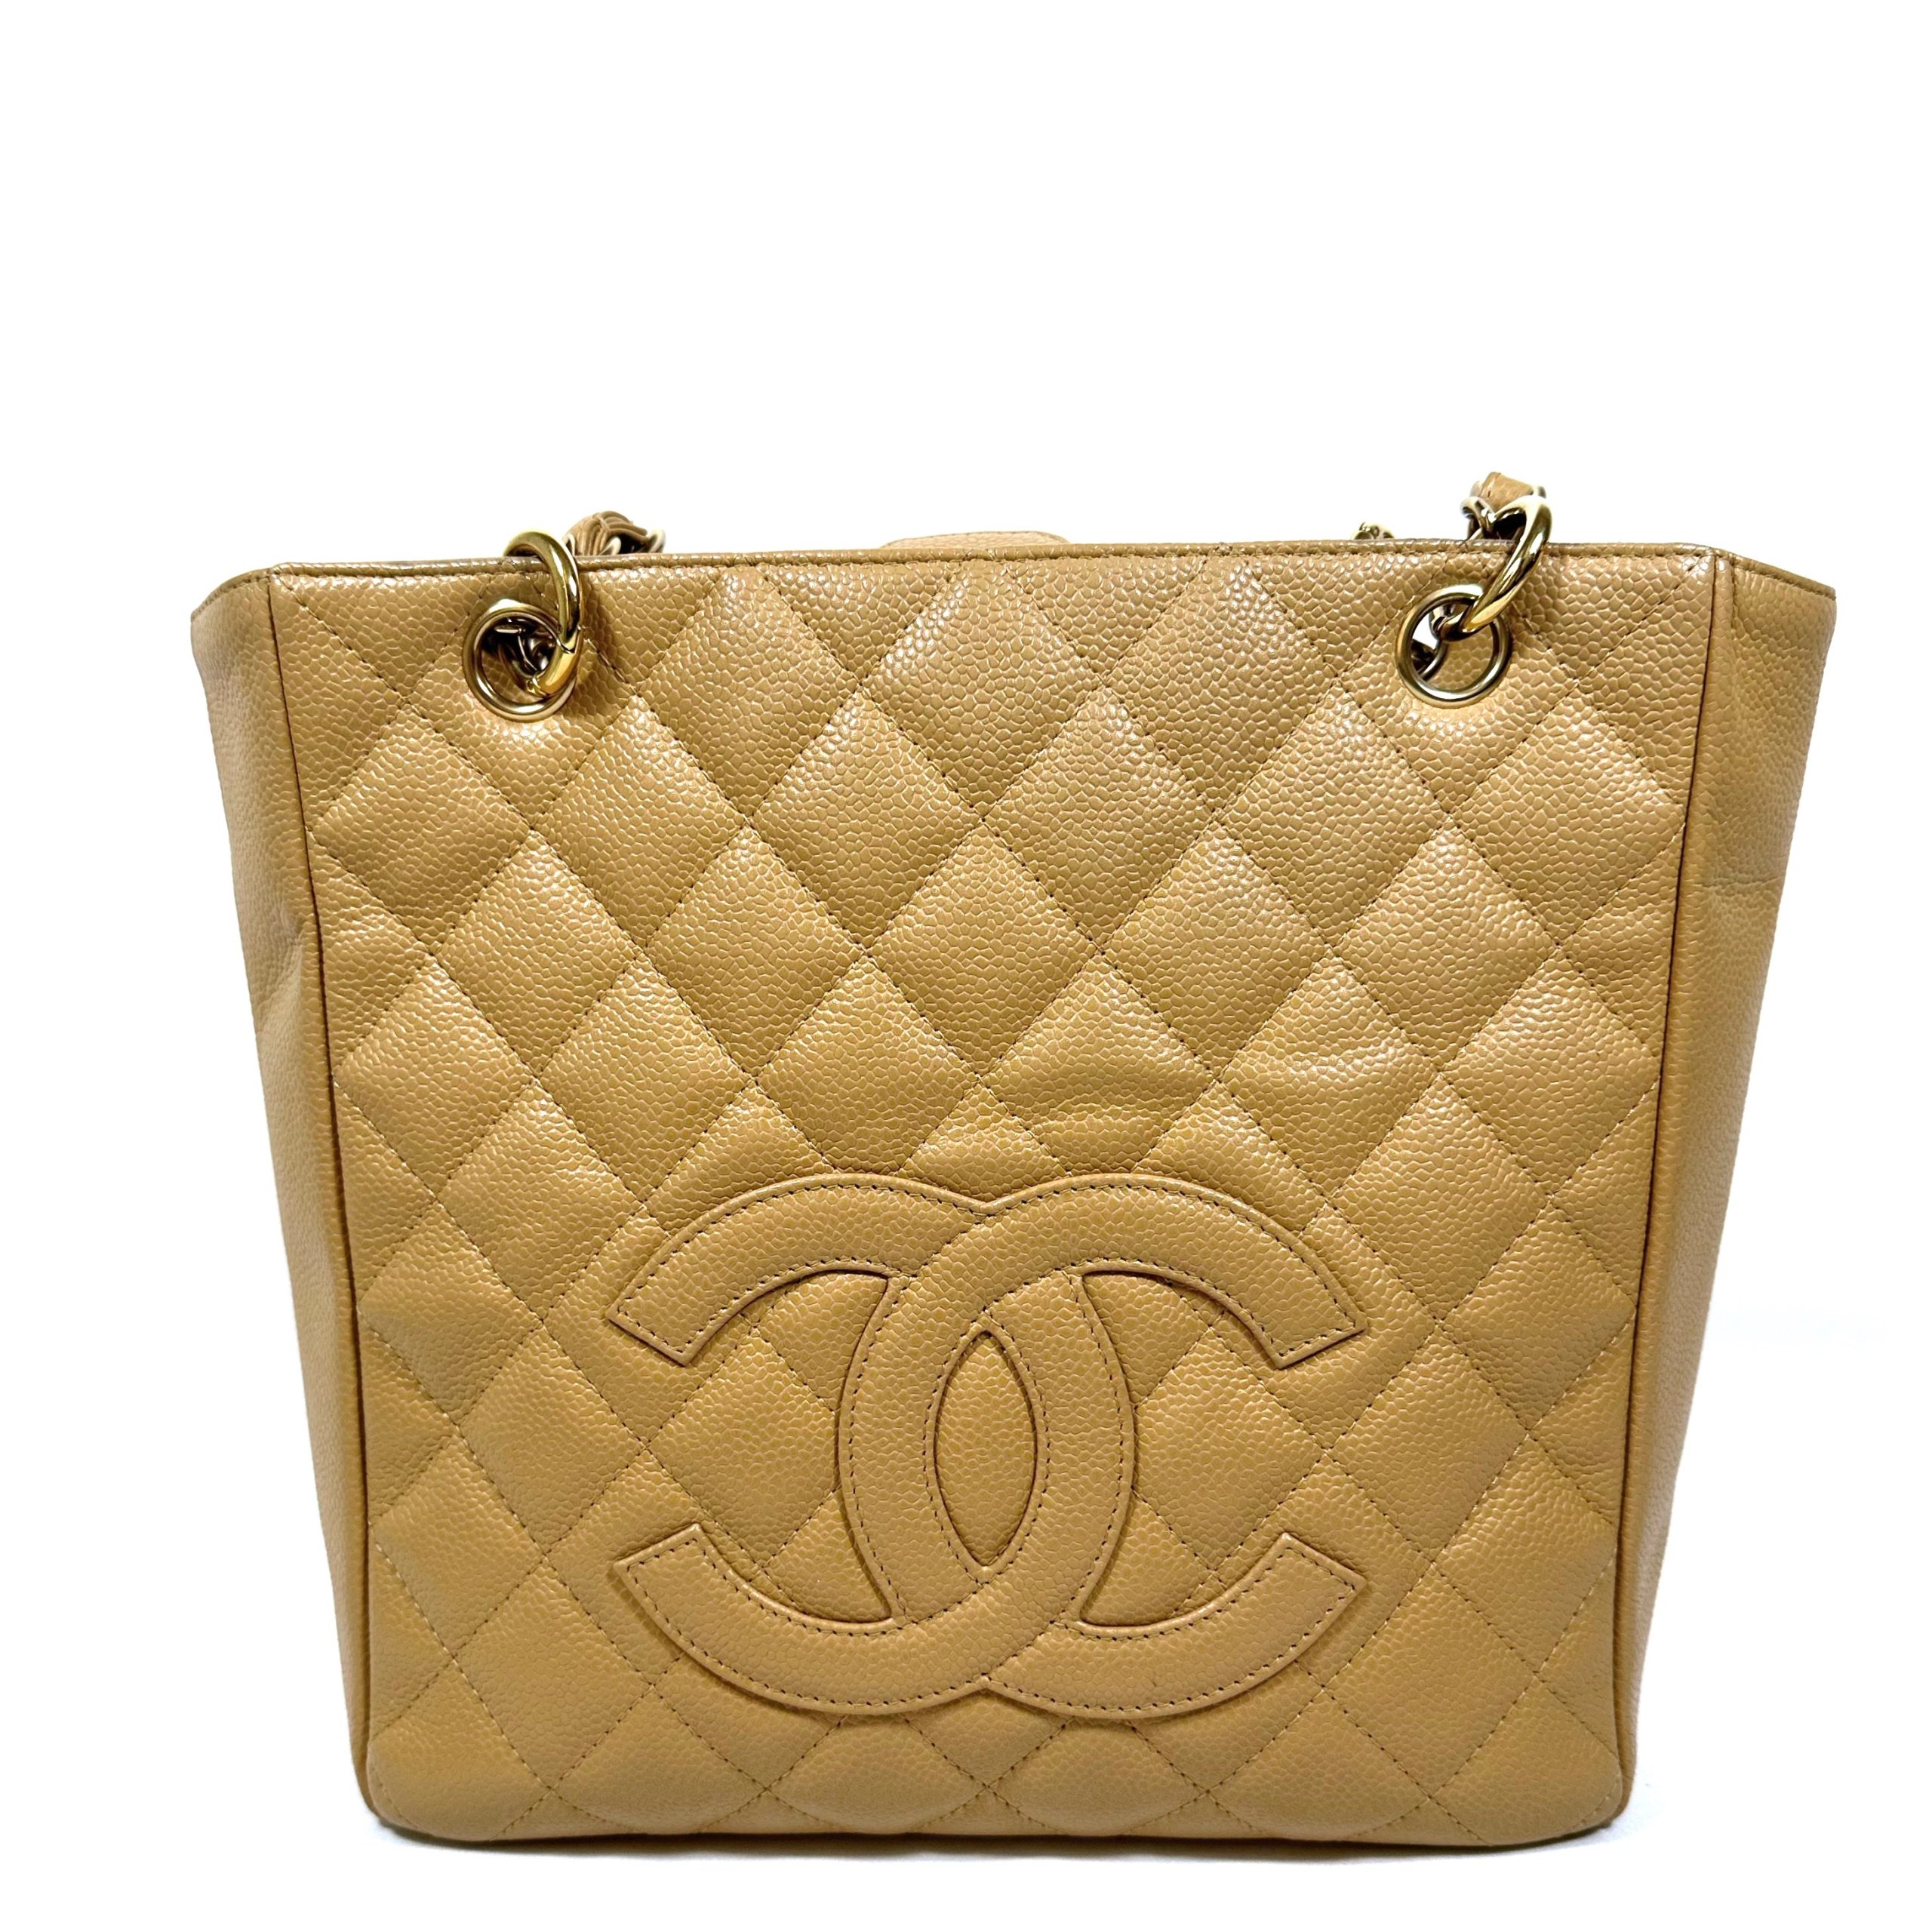 CHANEL PETITE SHOPPING TOTE BAG IN BEIGE CAVIAR LEATHER - Still in fashion